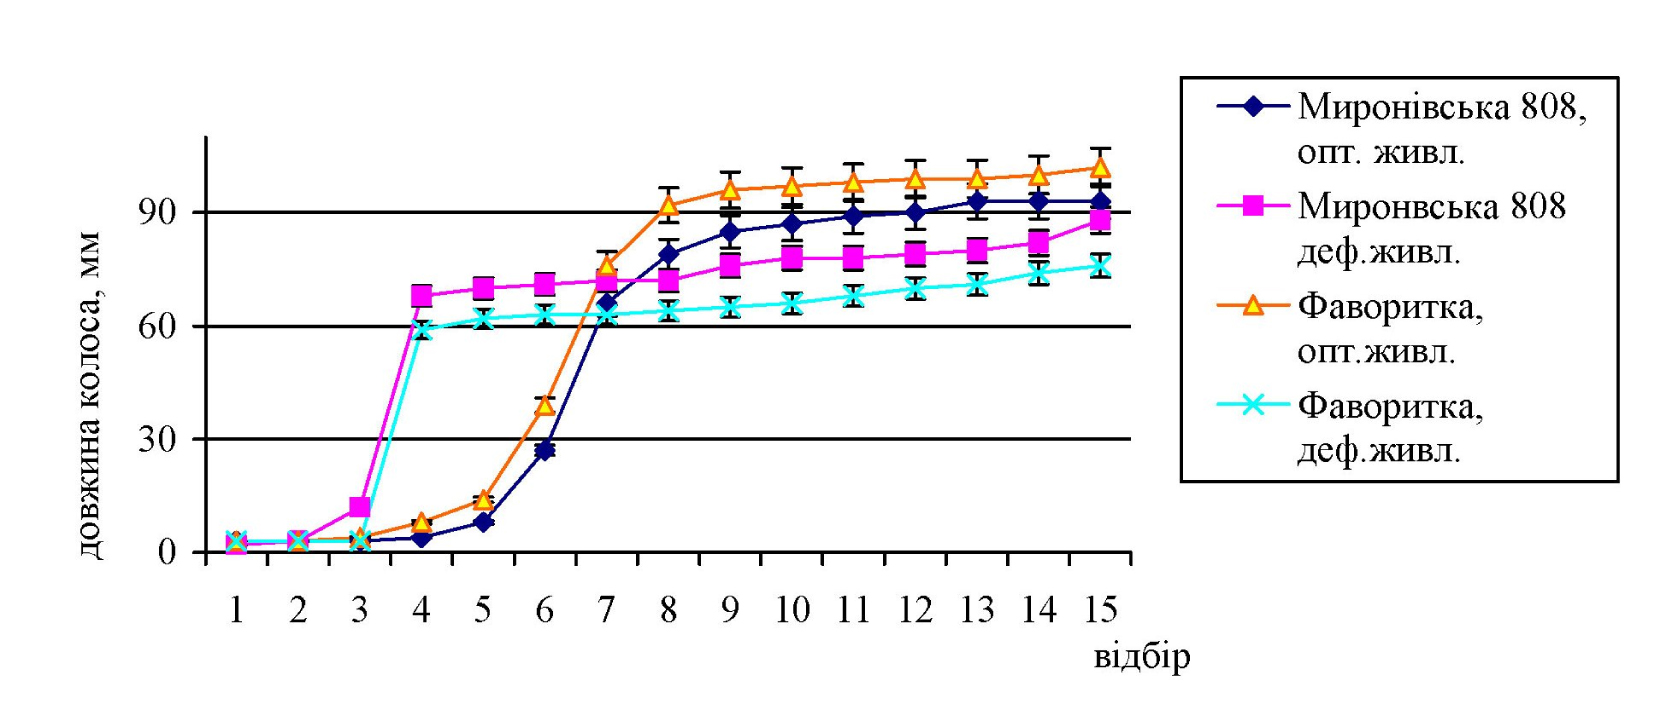 Fig. 1. Growth dynamіcs of wheat ear from the main stem under different mineral nutrition support.